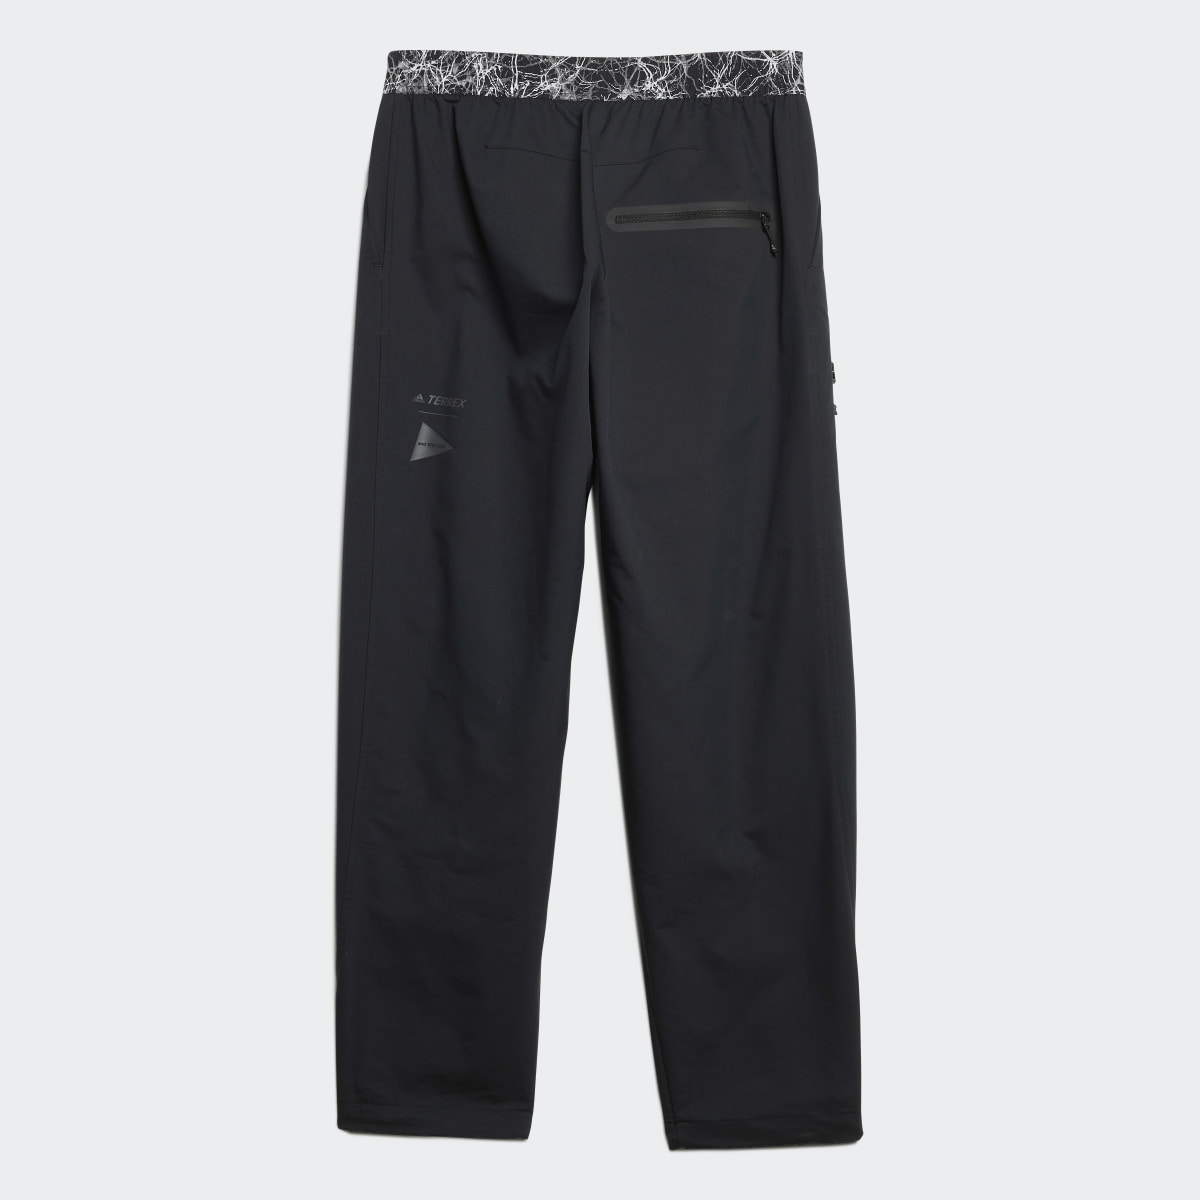 Adidas Terrex x and wander Trousers. 7